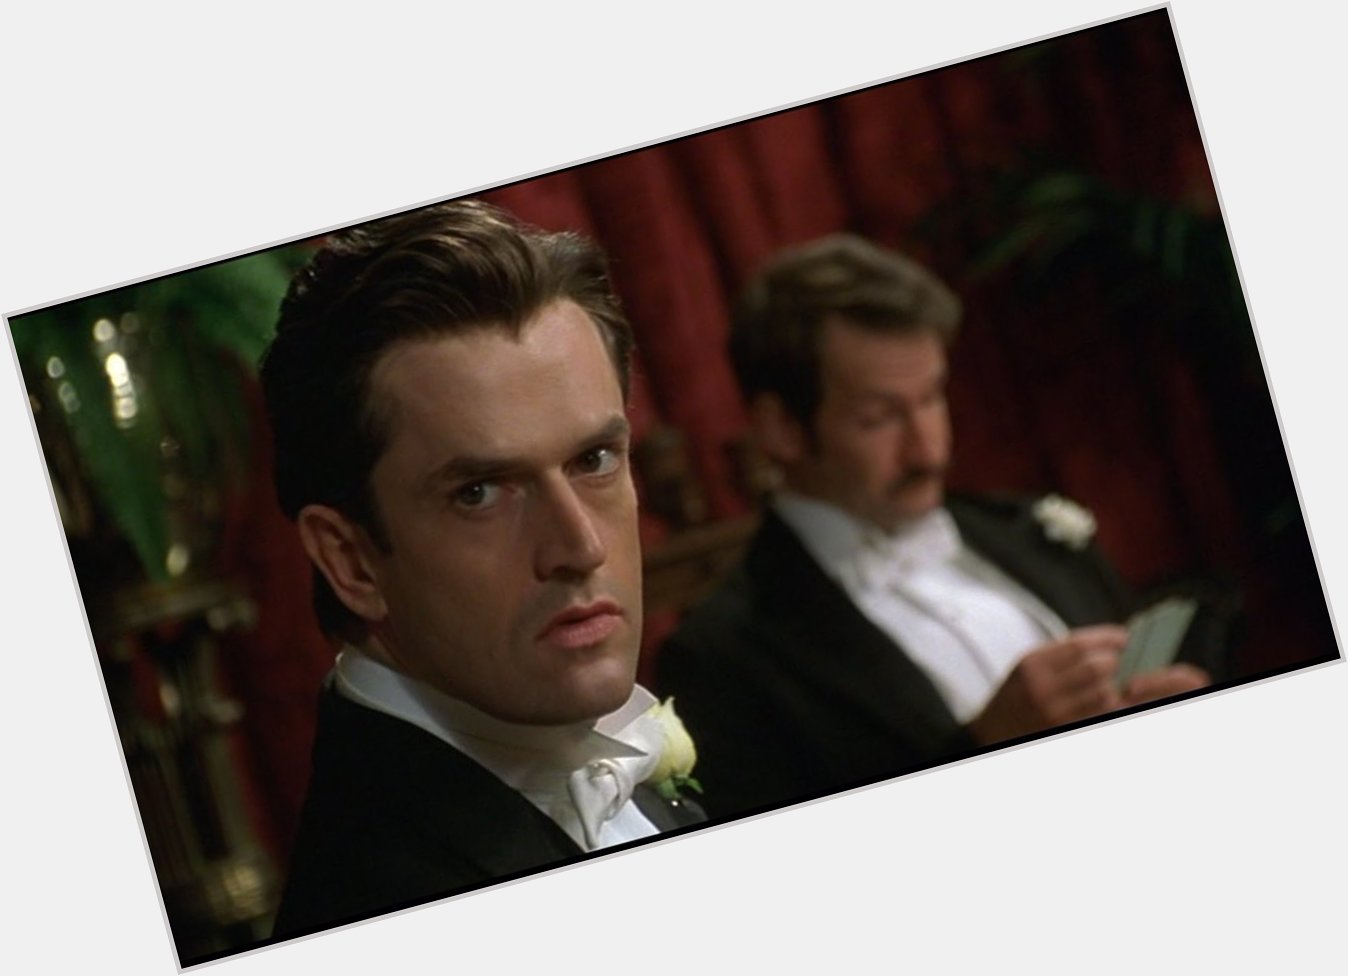 Happy birthday Rupert Everett, whom I liked very much in An ideal husband (perfect delivery of his dry wit lines). 